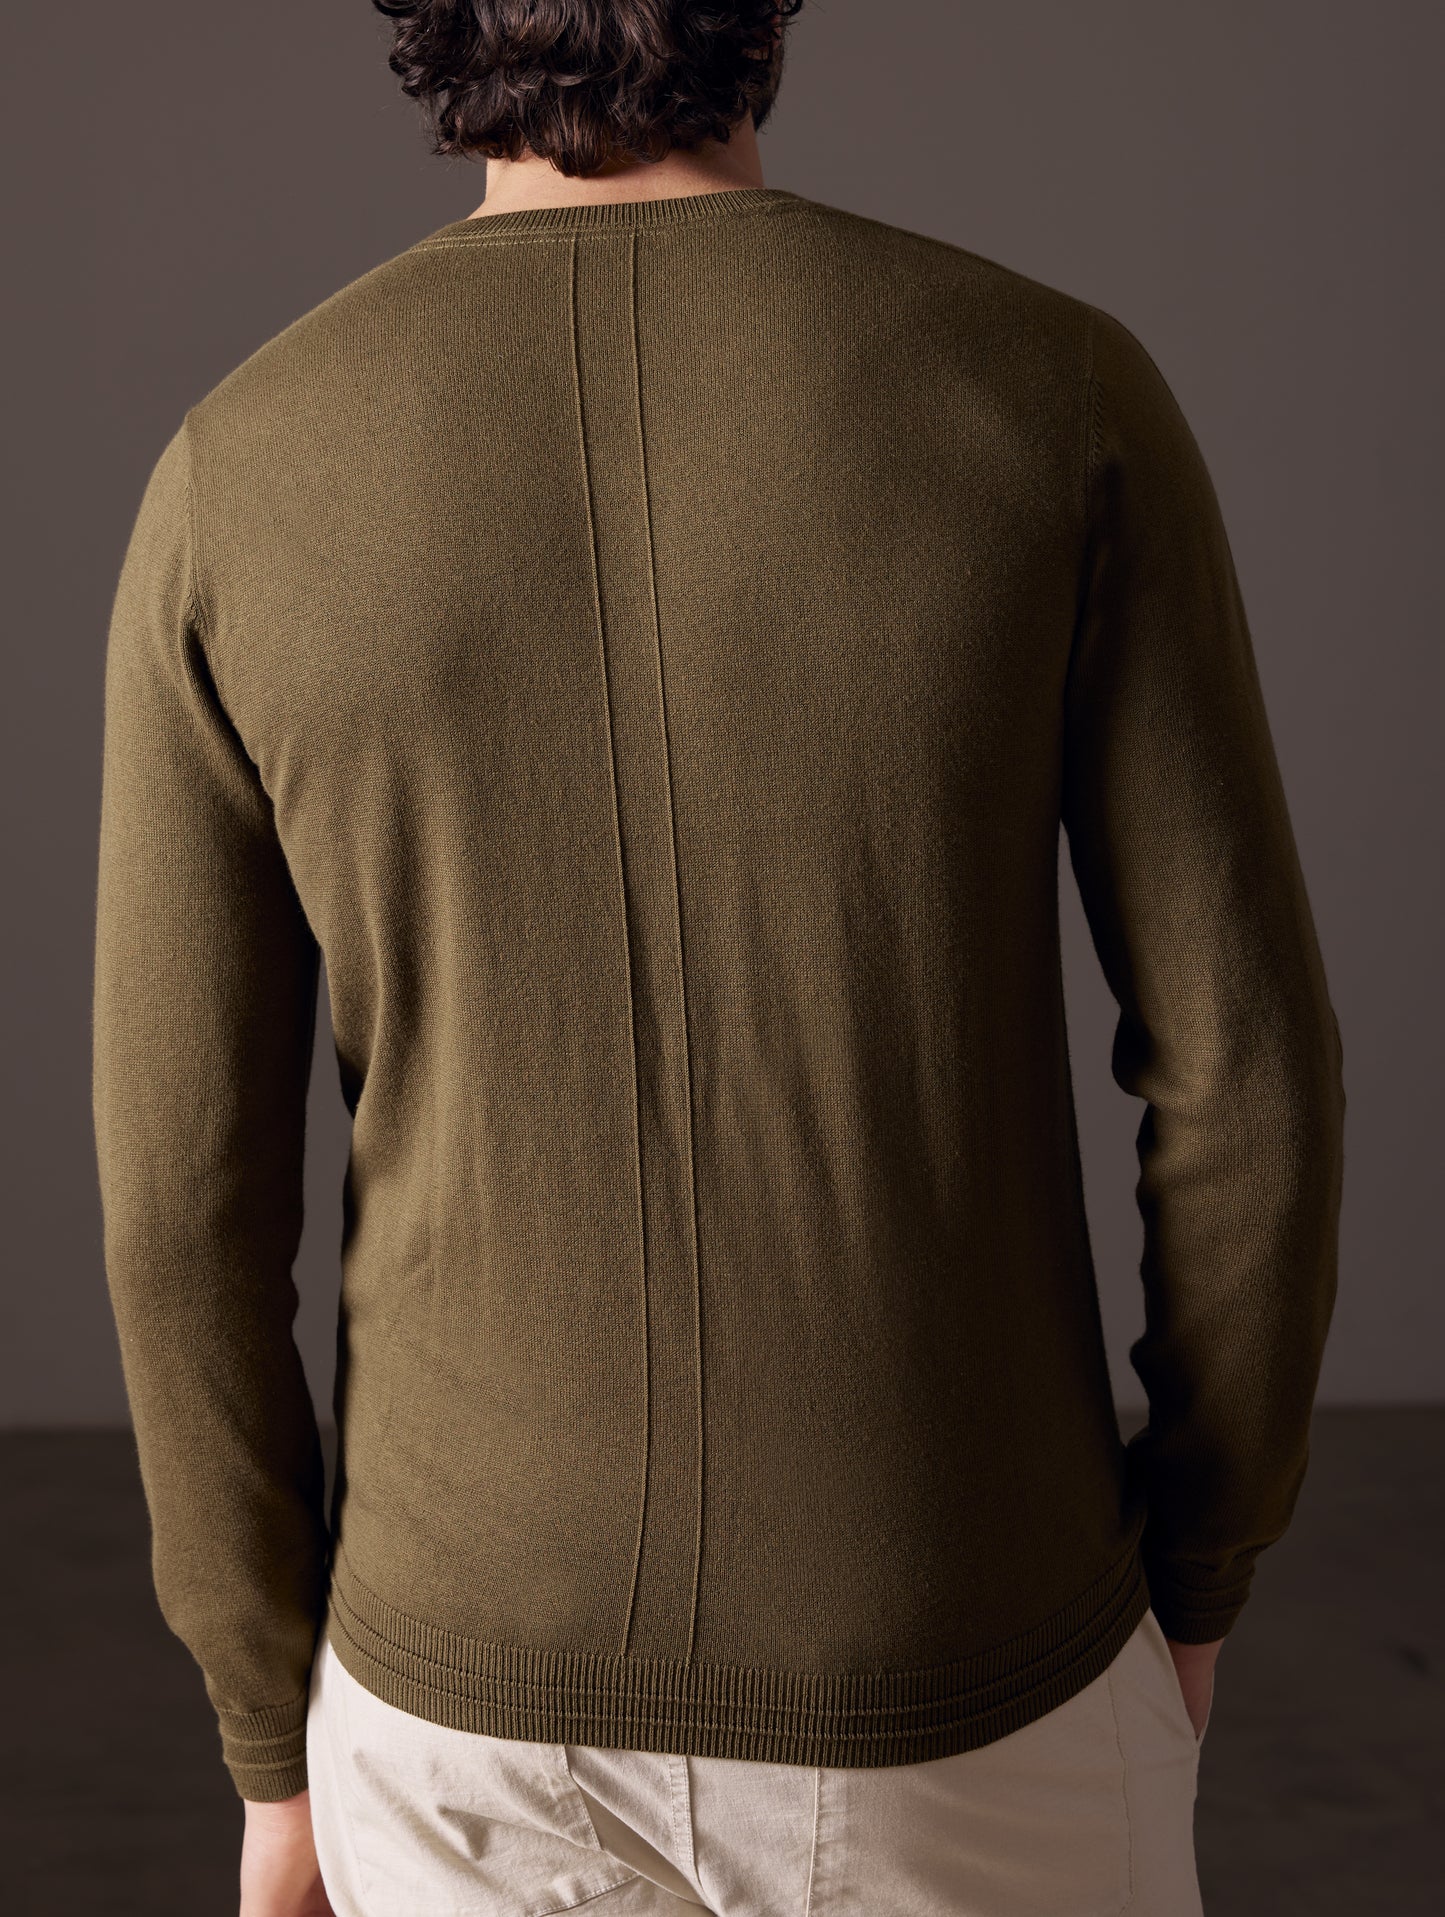 back view of man wearing green sweater